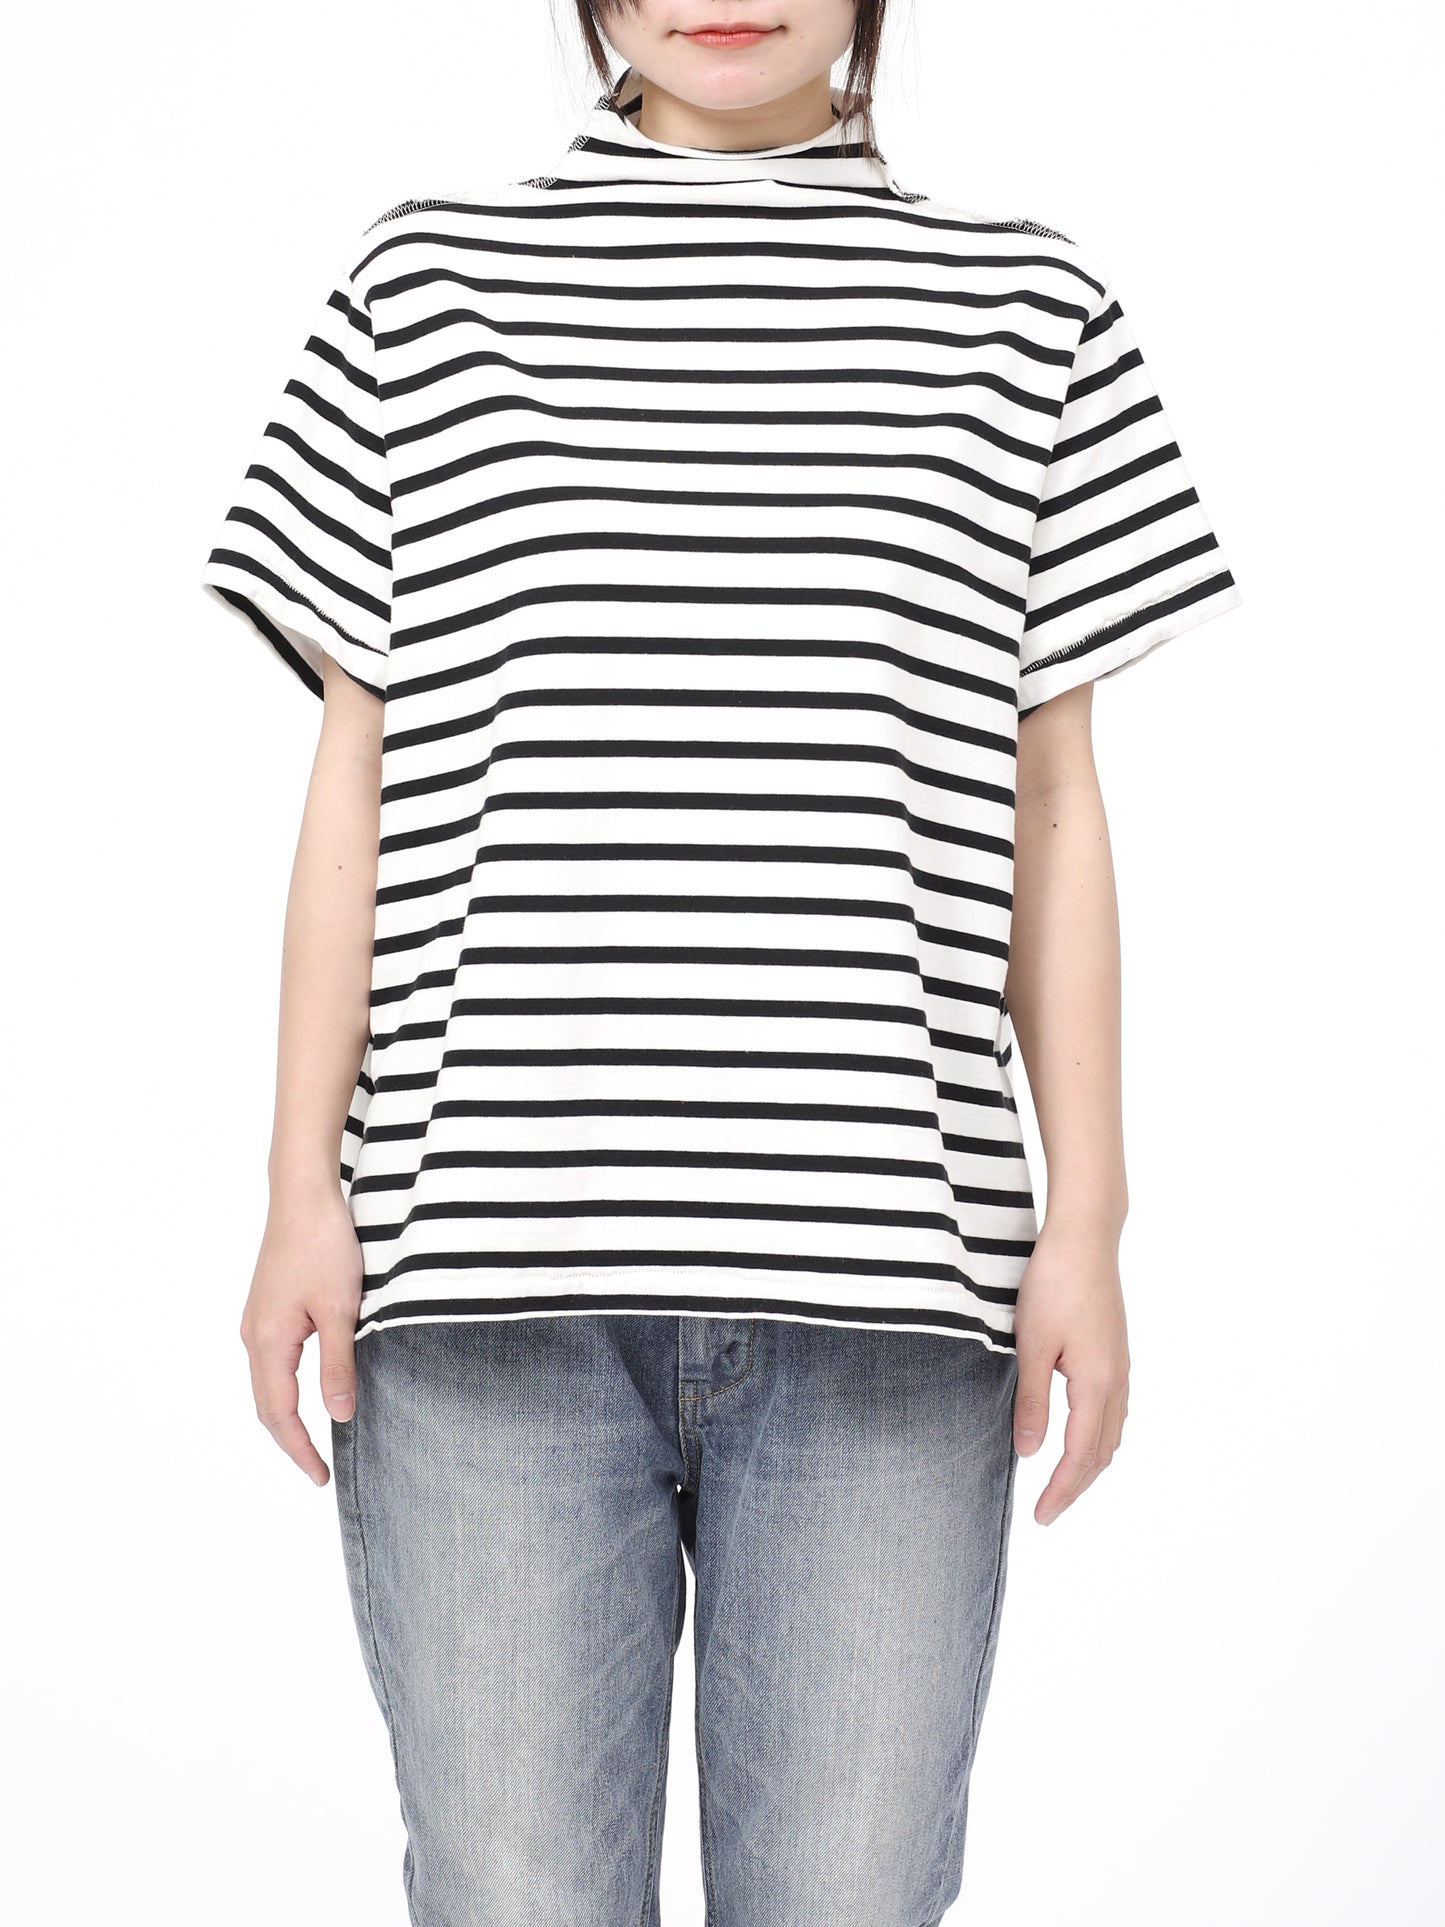 BAGGY S/S TEE COTTON BORDER JERSEY AM-C0406